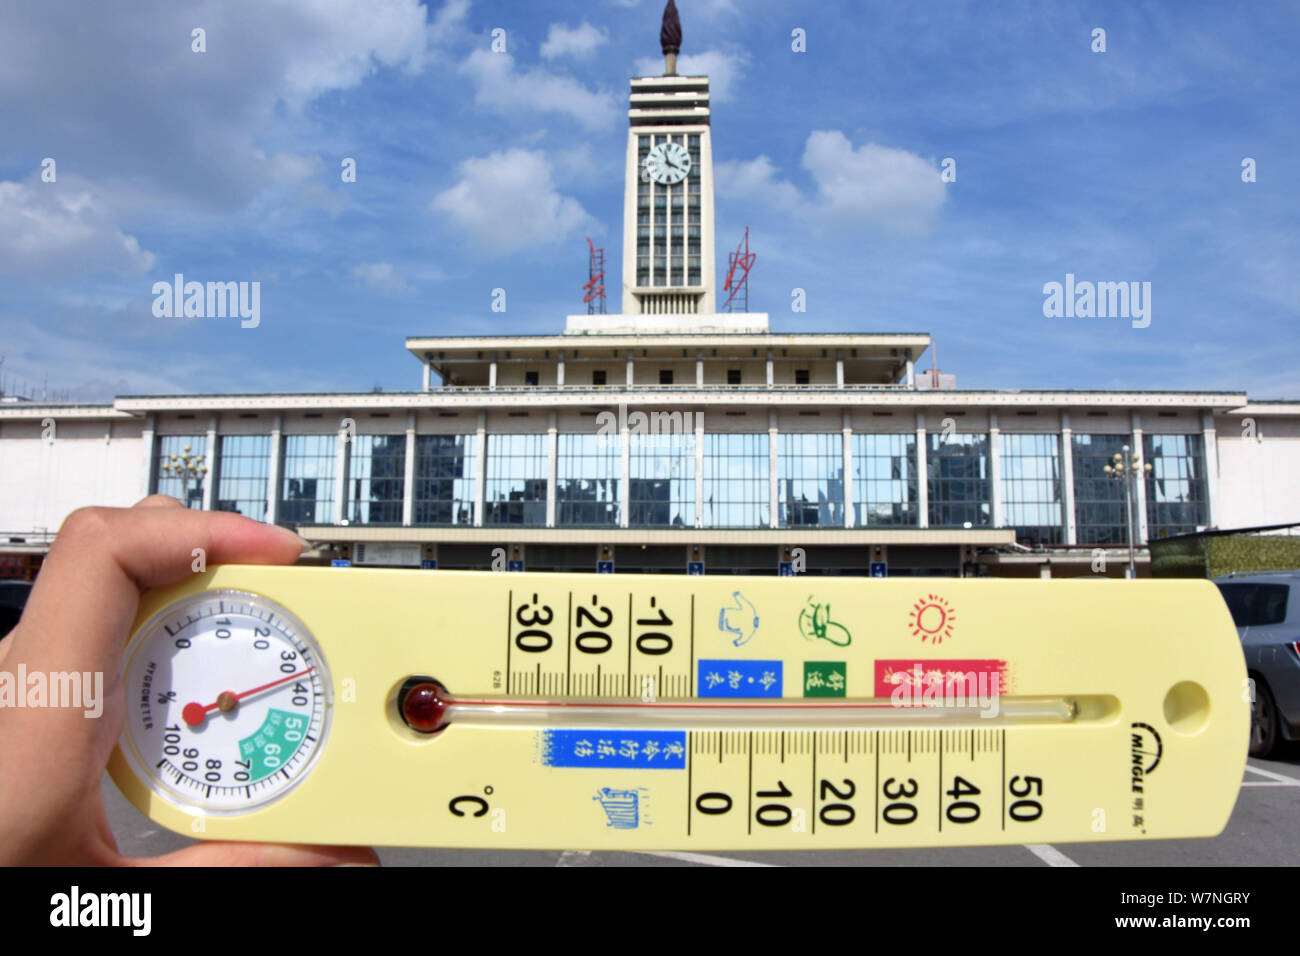 A local resident displays a thermometer showing the current temperature reaching 38 degrees Celsius on a scorching day in front of the Changsha Railwa Stock Photo